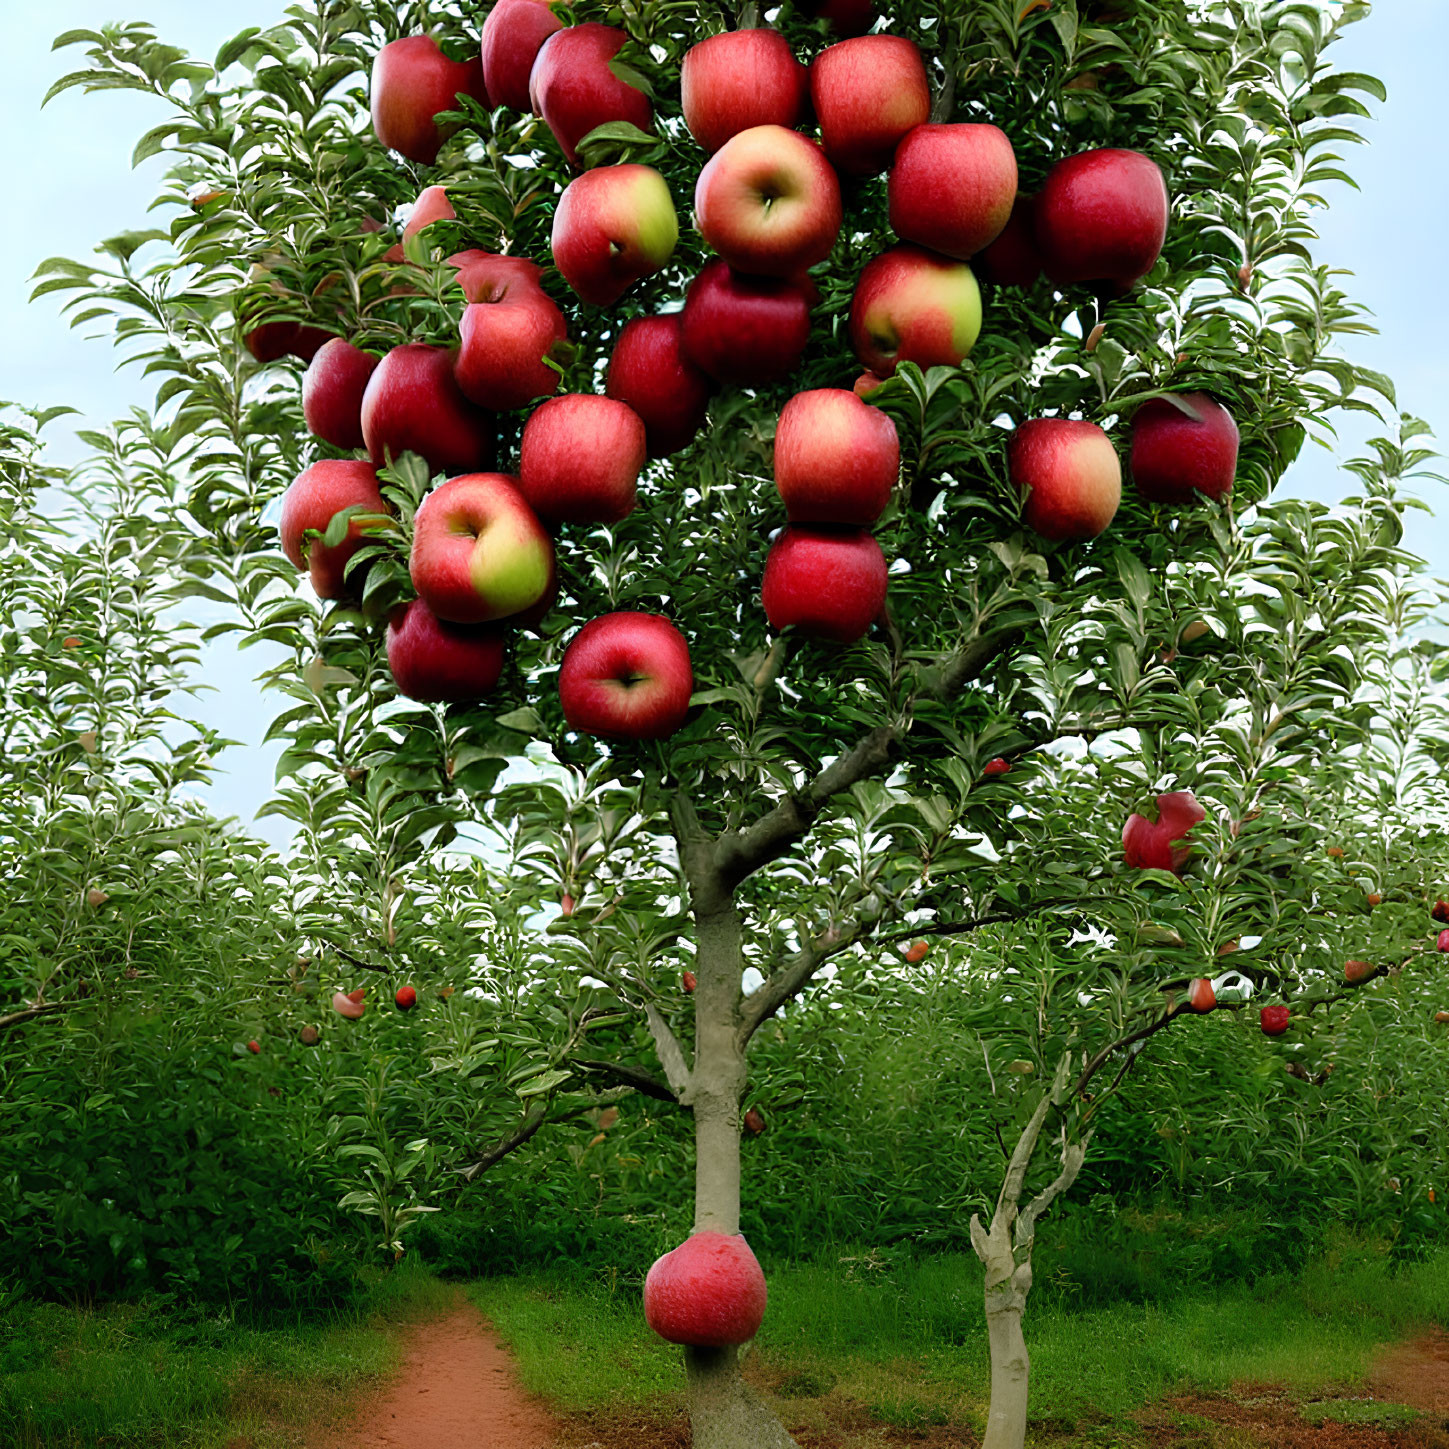 Lush Apple Orchard with Ripe Red Apples and Pathway